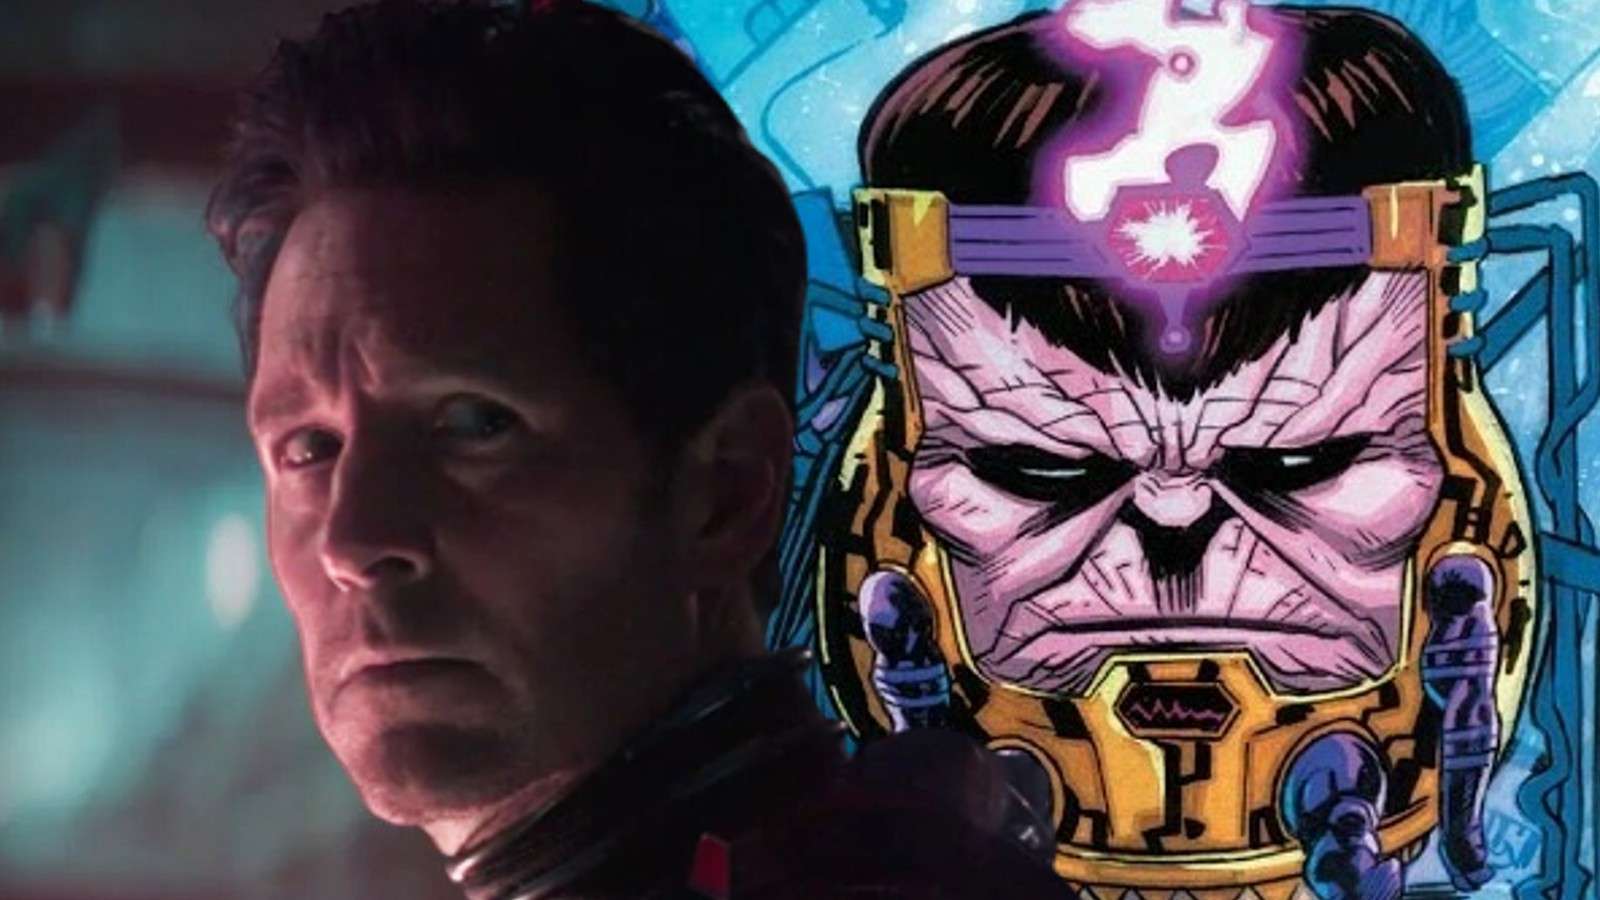 Paul Rudd in Ant-Man 3 and a still of MODOK from the comics